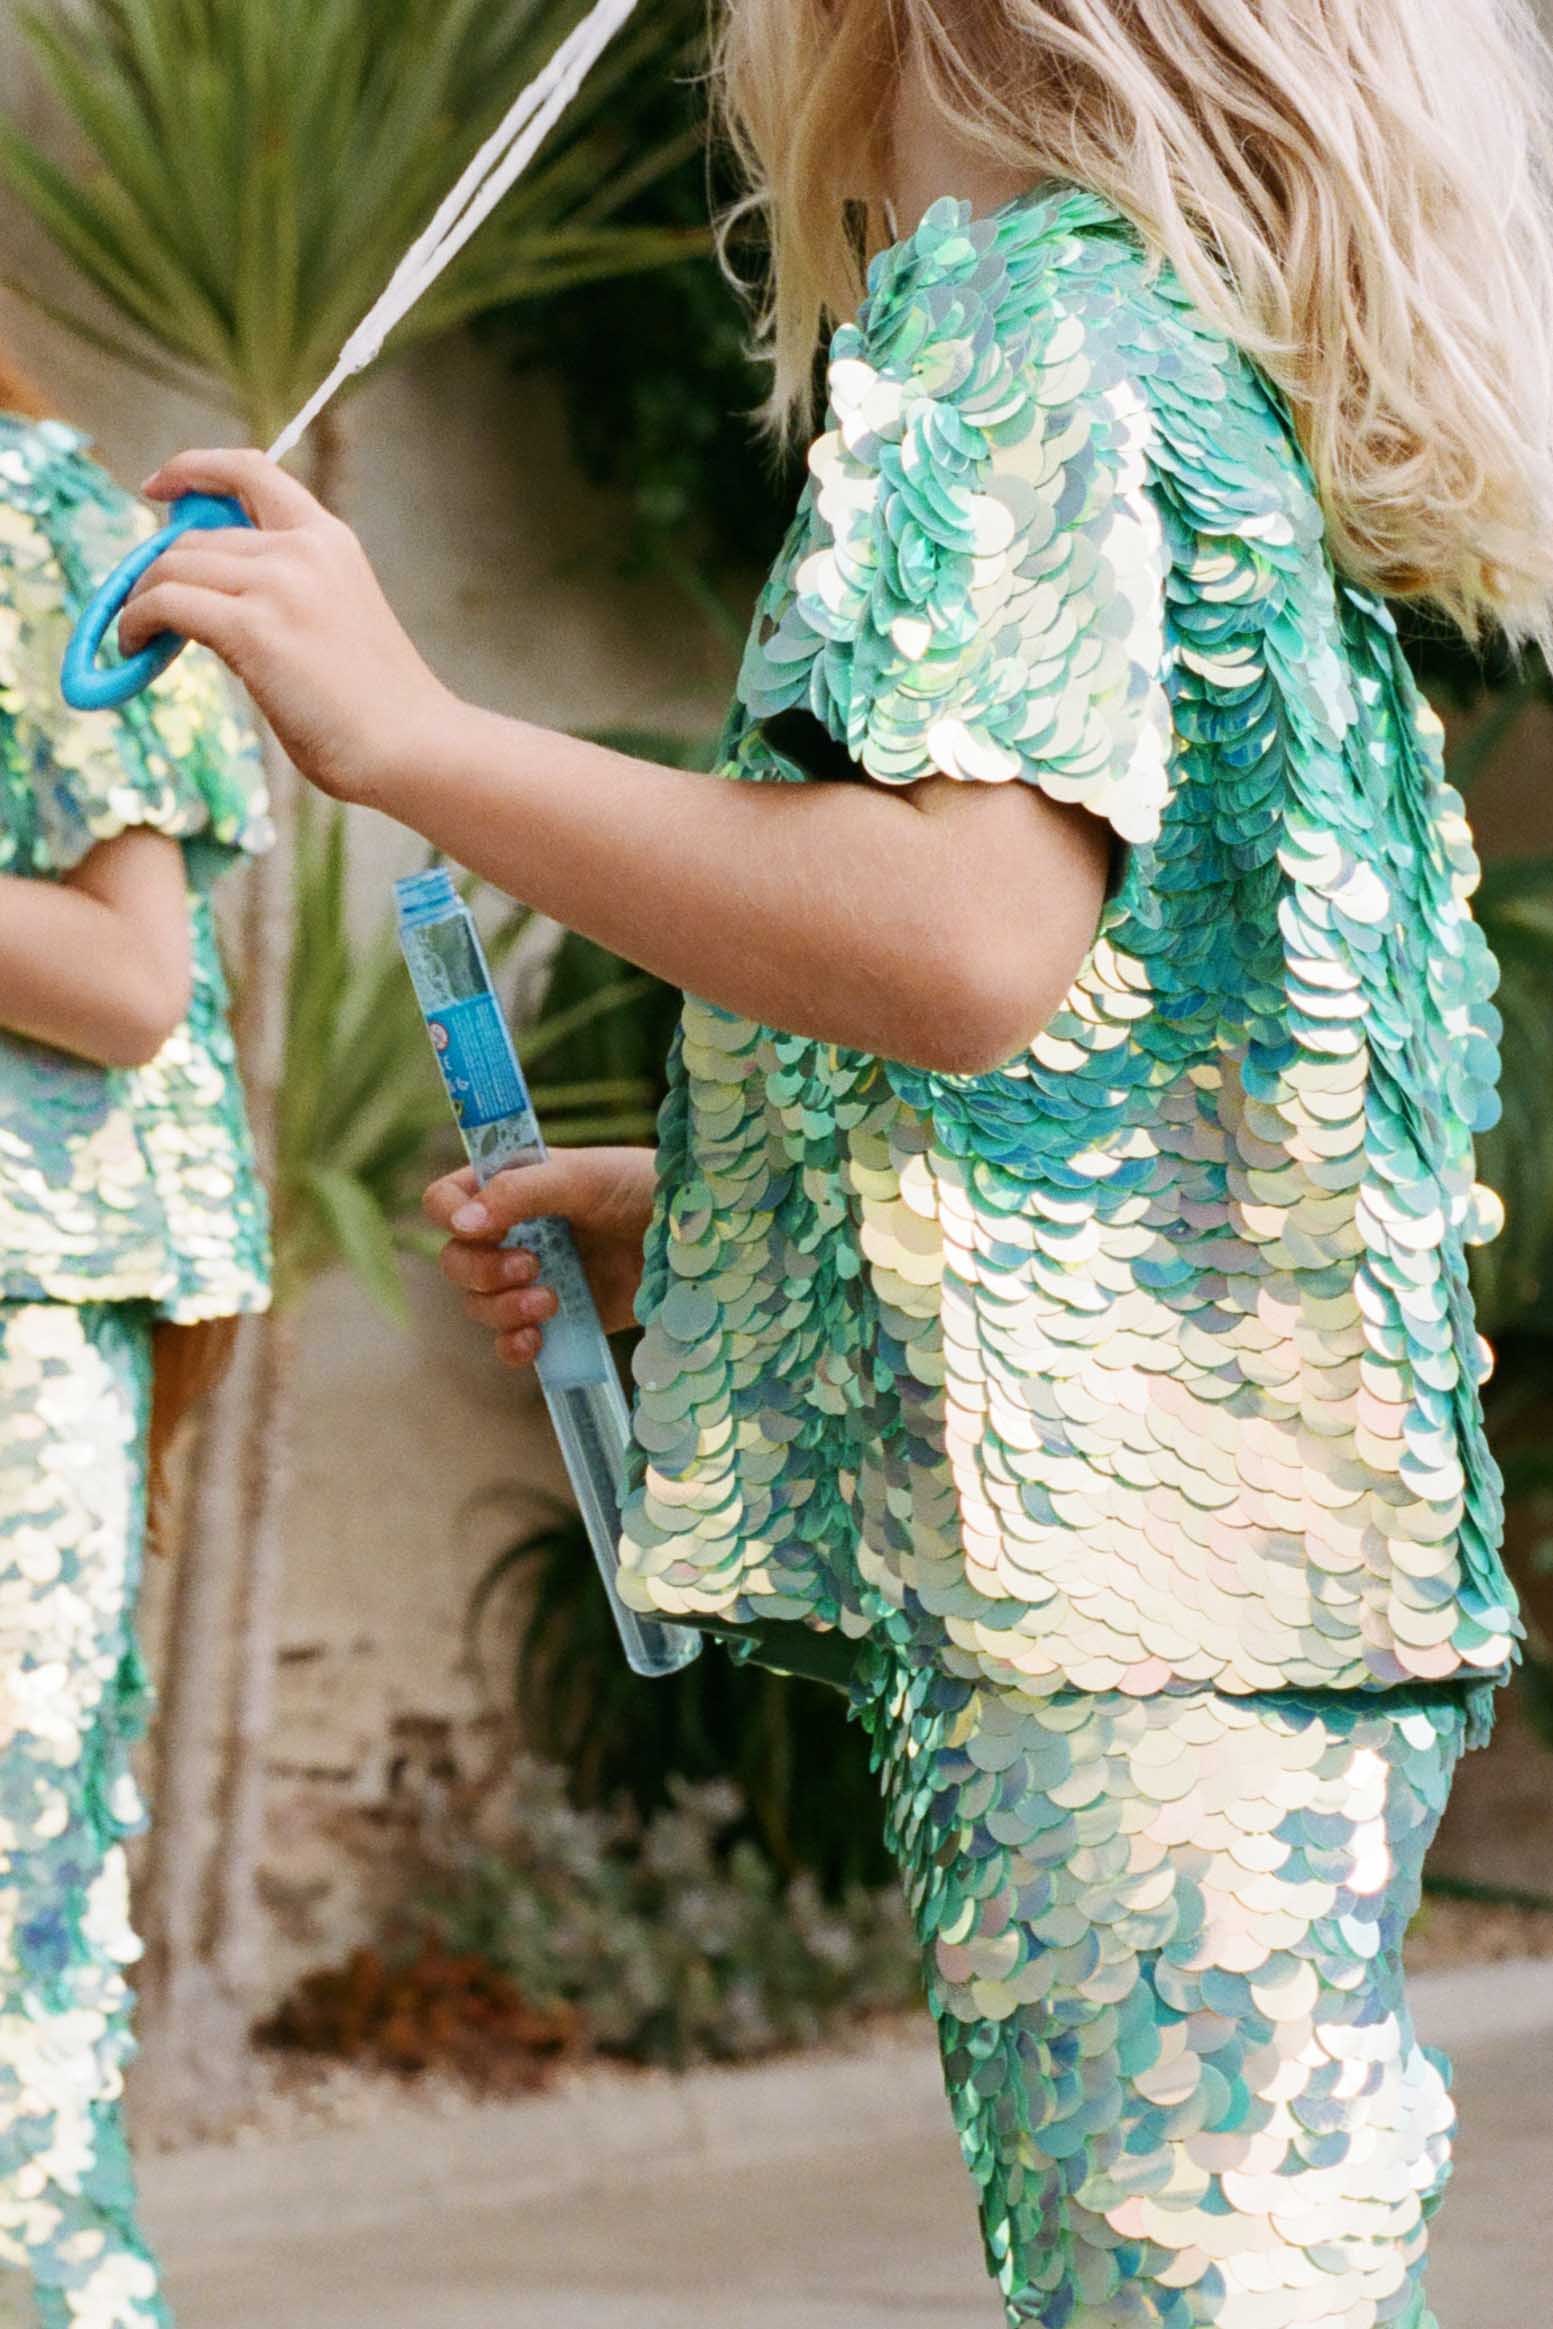 A cropped image of a child in a brightly lit outdoor walled garden space with tropical plants, splaying with bubbles. He is wearing Rosa Bloom chameleon mint green, shimmering sequin childrenswear. He wearing the chameleon Luna sequin leggings and matching sequin Sonny children’s t-shirt. 